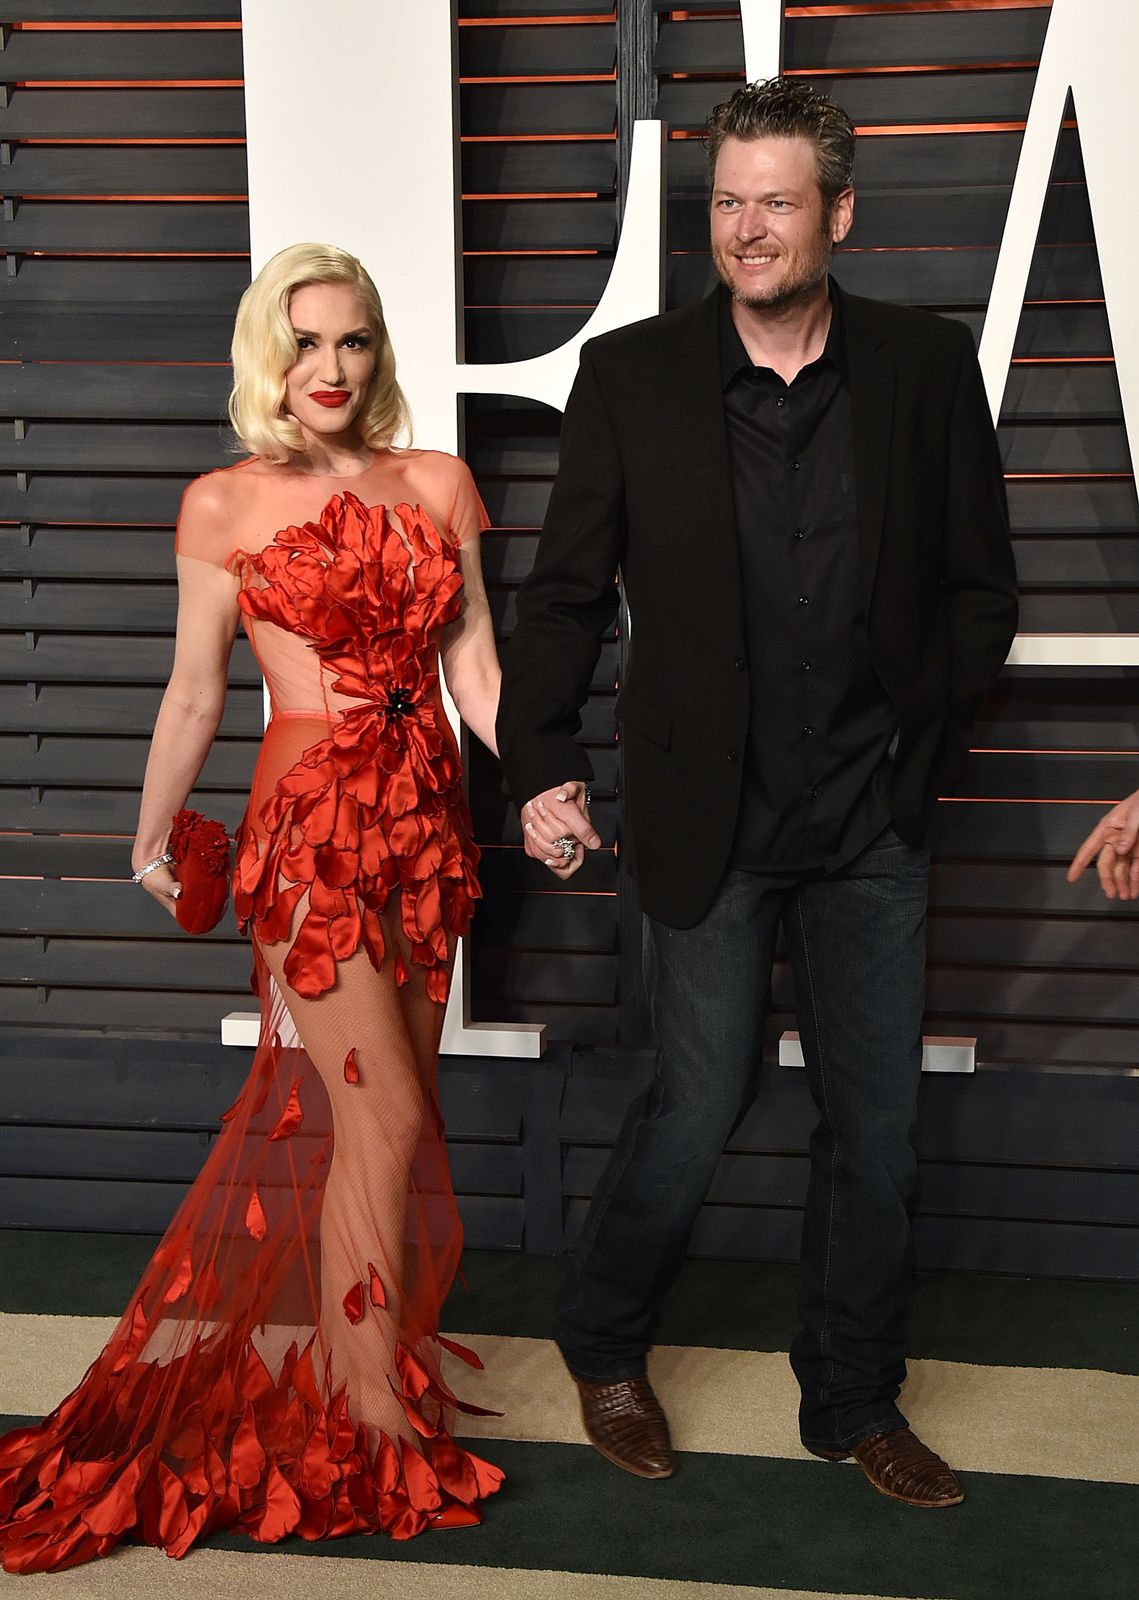 Gwen Stefani and Blake Shelton at the "Vanity Fair" Oscar Party hosted by Graydon Carter on February 28, 2016, in Beverly Hills, California | Photo: John Shearer/Getty Images